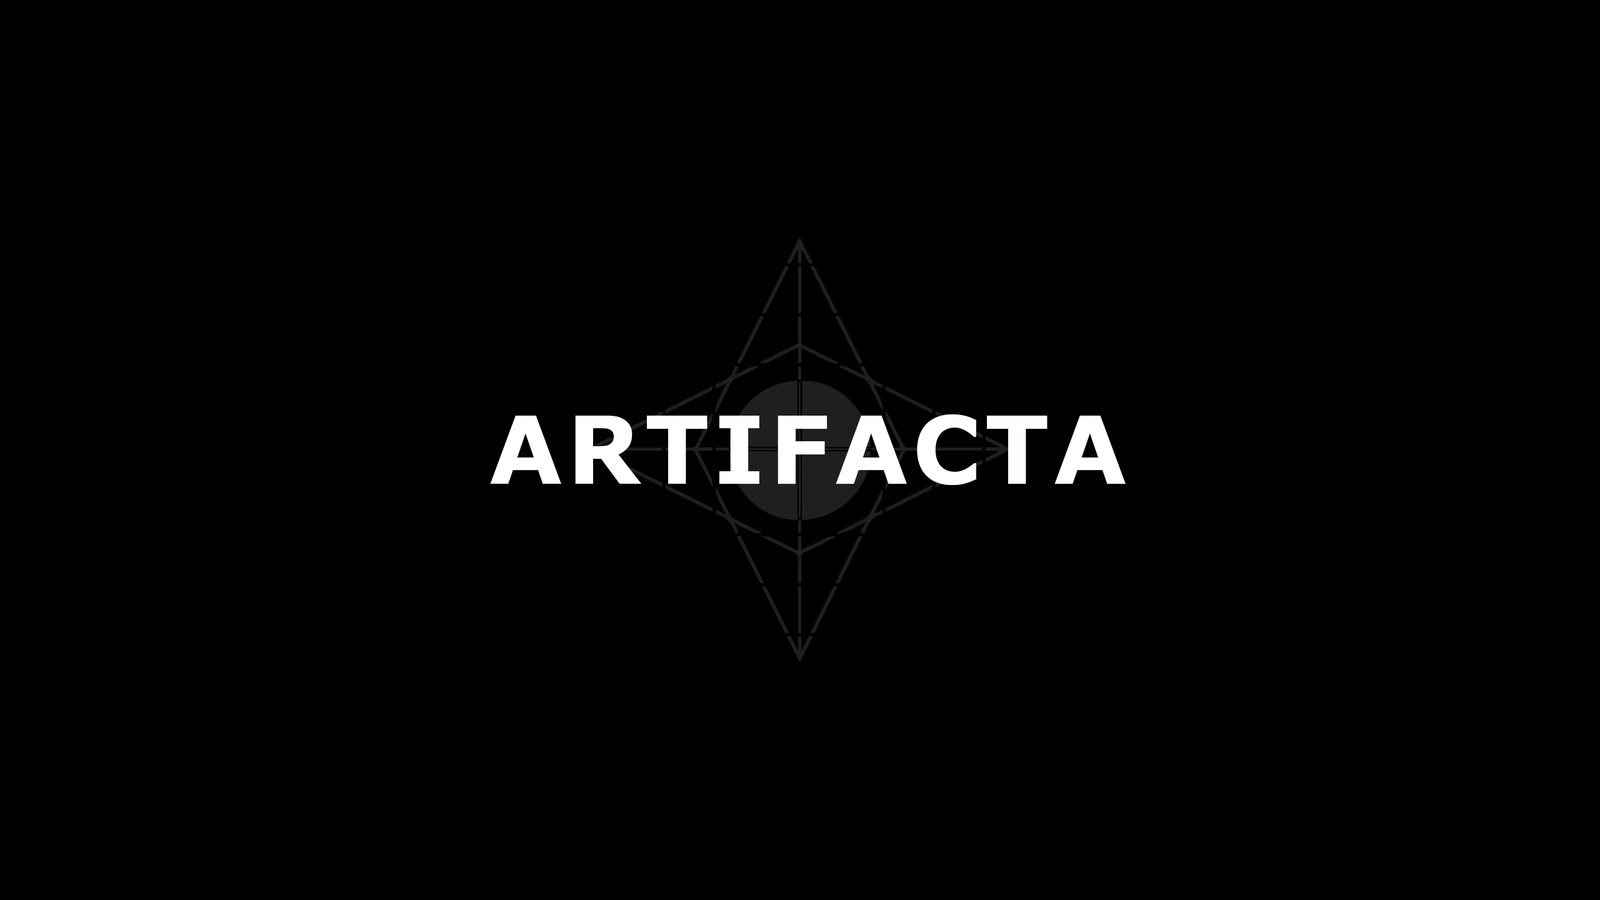 ARTIFACTA 0.9.1 - Human = Humanity? - My, Person, Humanity, Regression, Personality, Psychology, Philosophy, Flow, Public opinion